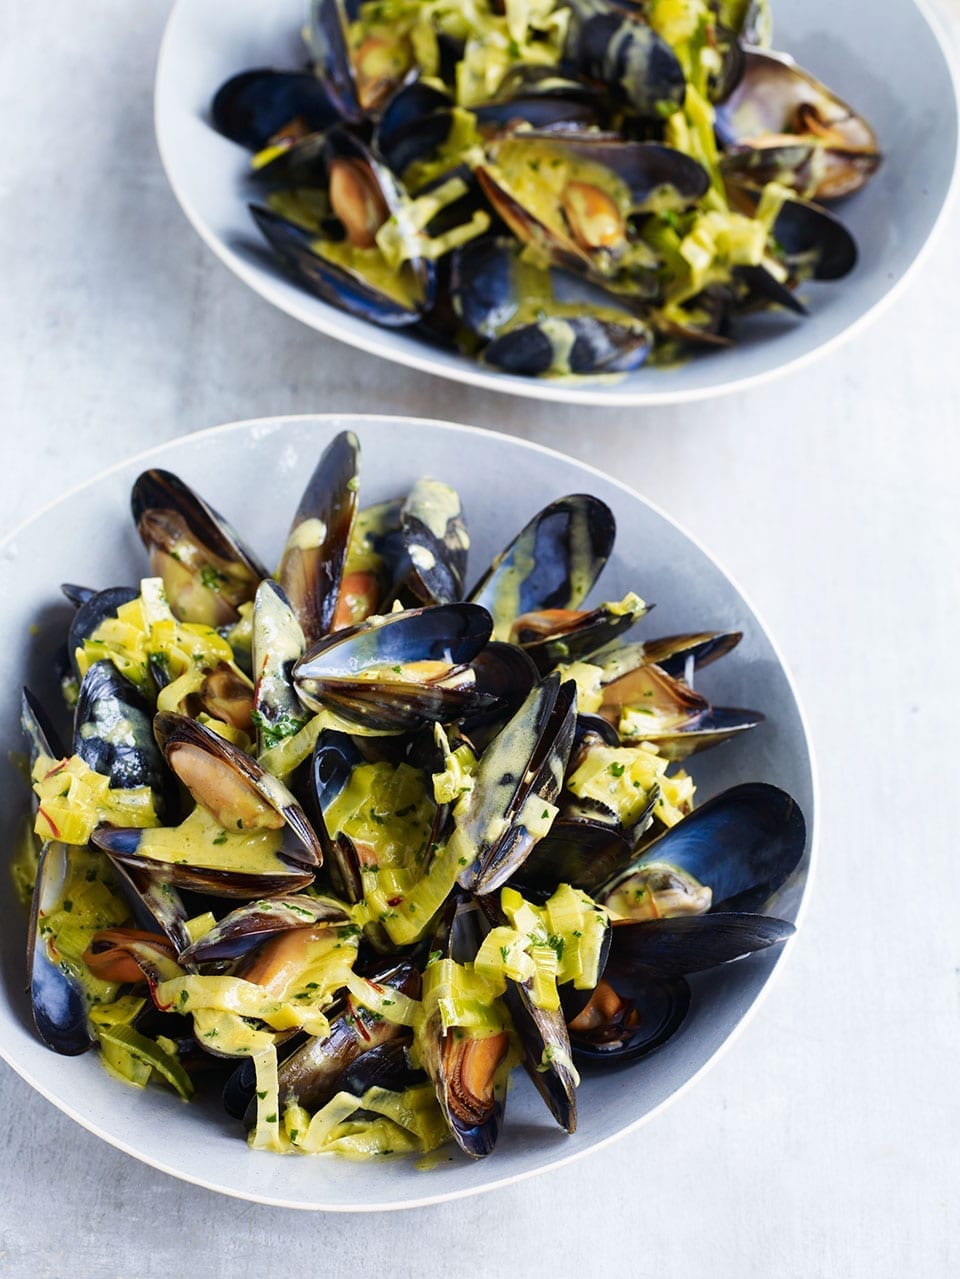 Steamed mussels with curry, leeks and saffron recipe | delicious. magazine